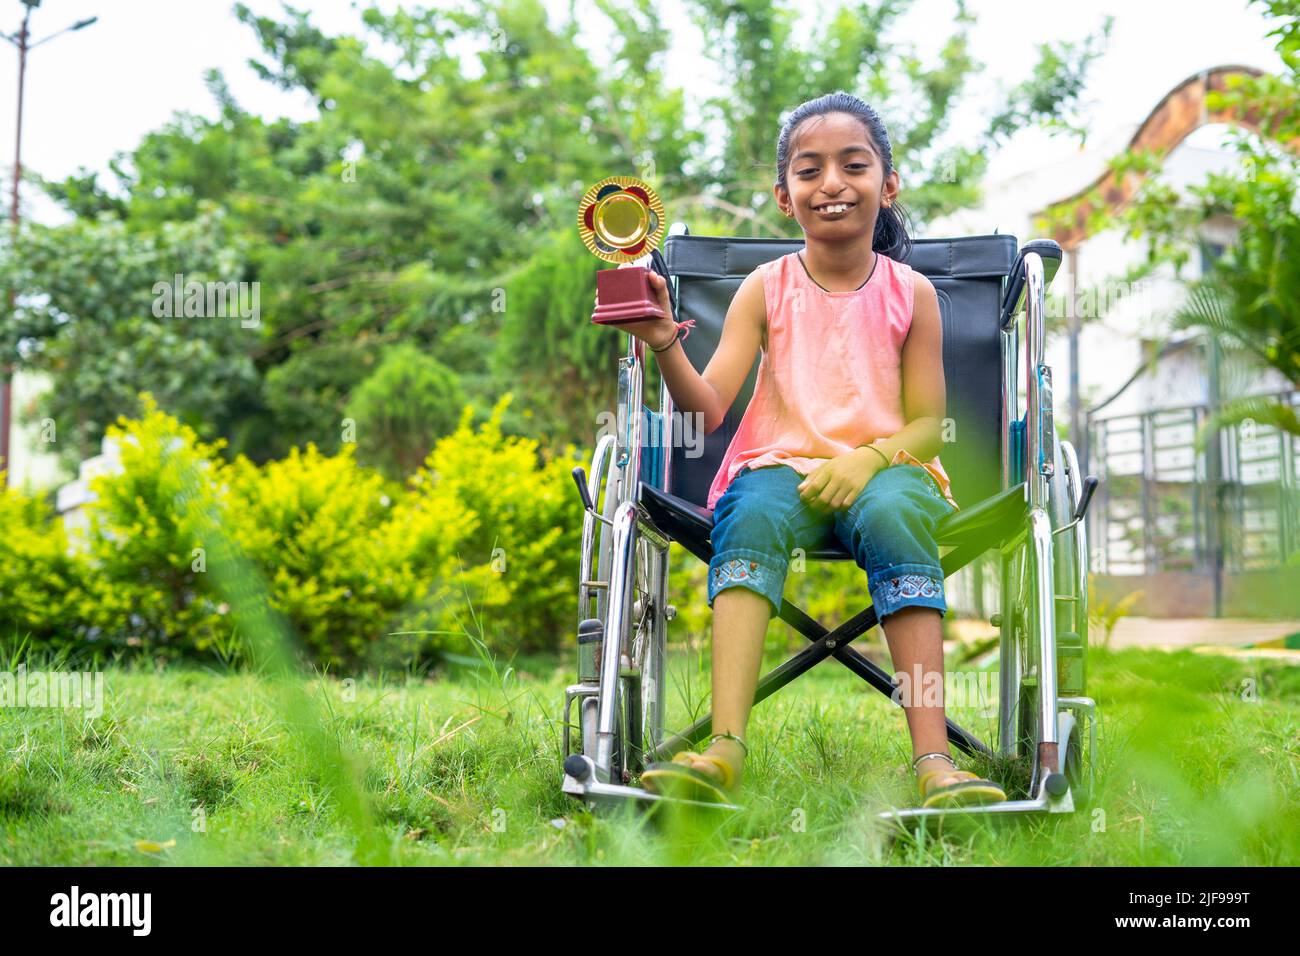 concpe tof inspiration and motivation, showing by young teenager girl kid with disability celebrating by holding trophy on wheelchair Stock Photo